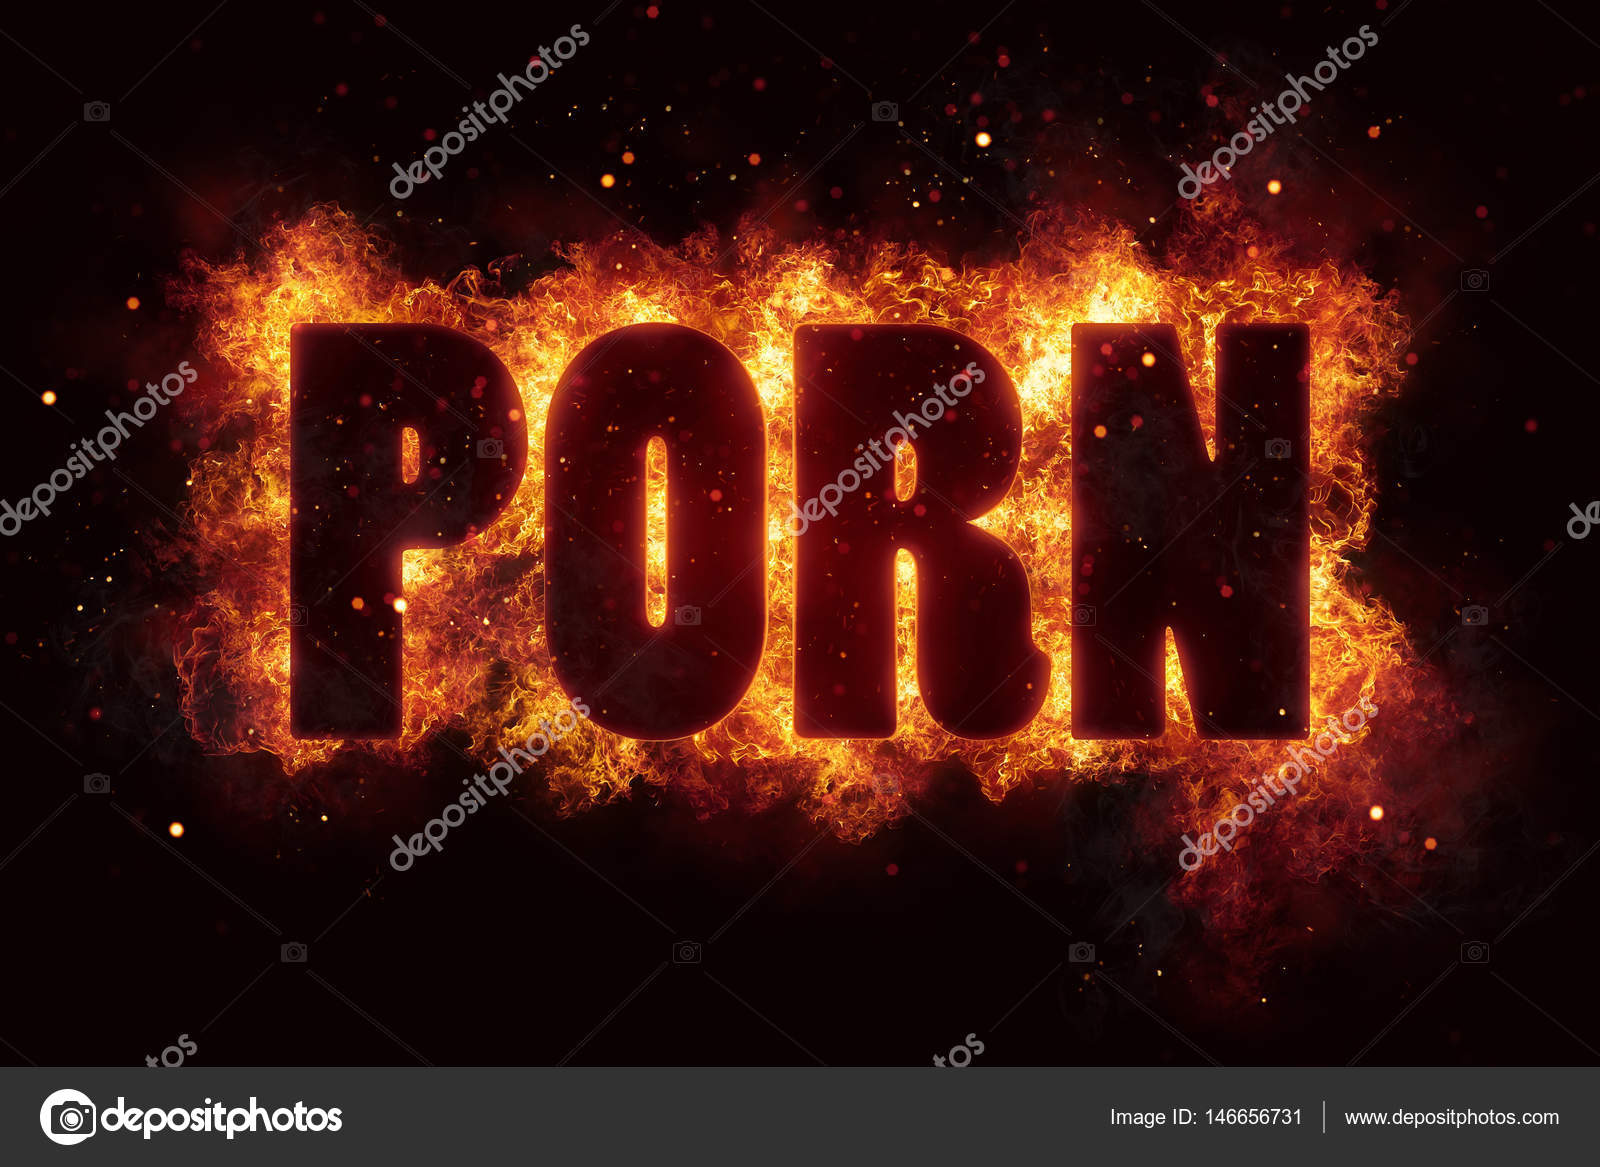 Xxx Sex In The Flame - Porn sex adult xxx text on fire flames explosion burning Stock Photo by  Â©artefacti 146656731